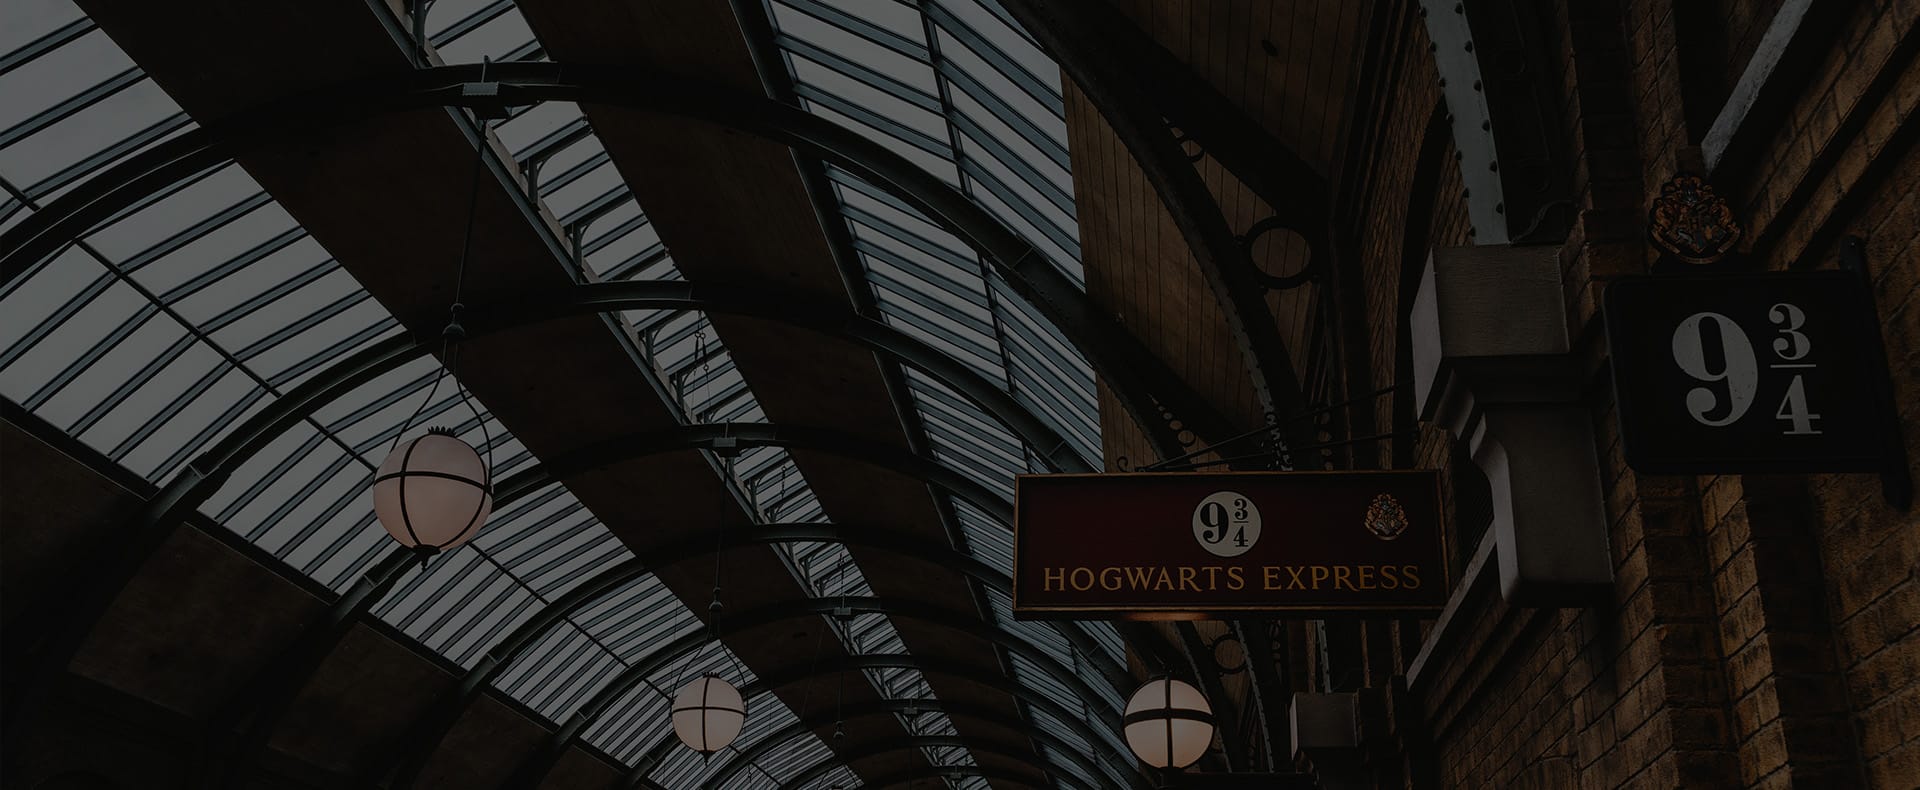 Platform nine and three quarters at Kings Cross Station with signage indicating the platform and windows above